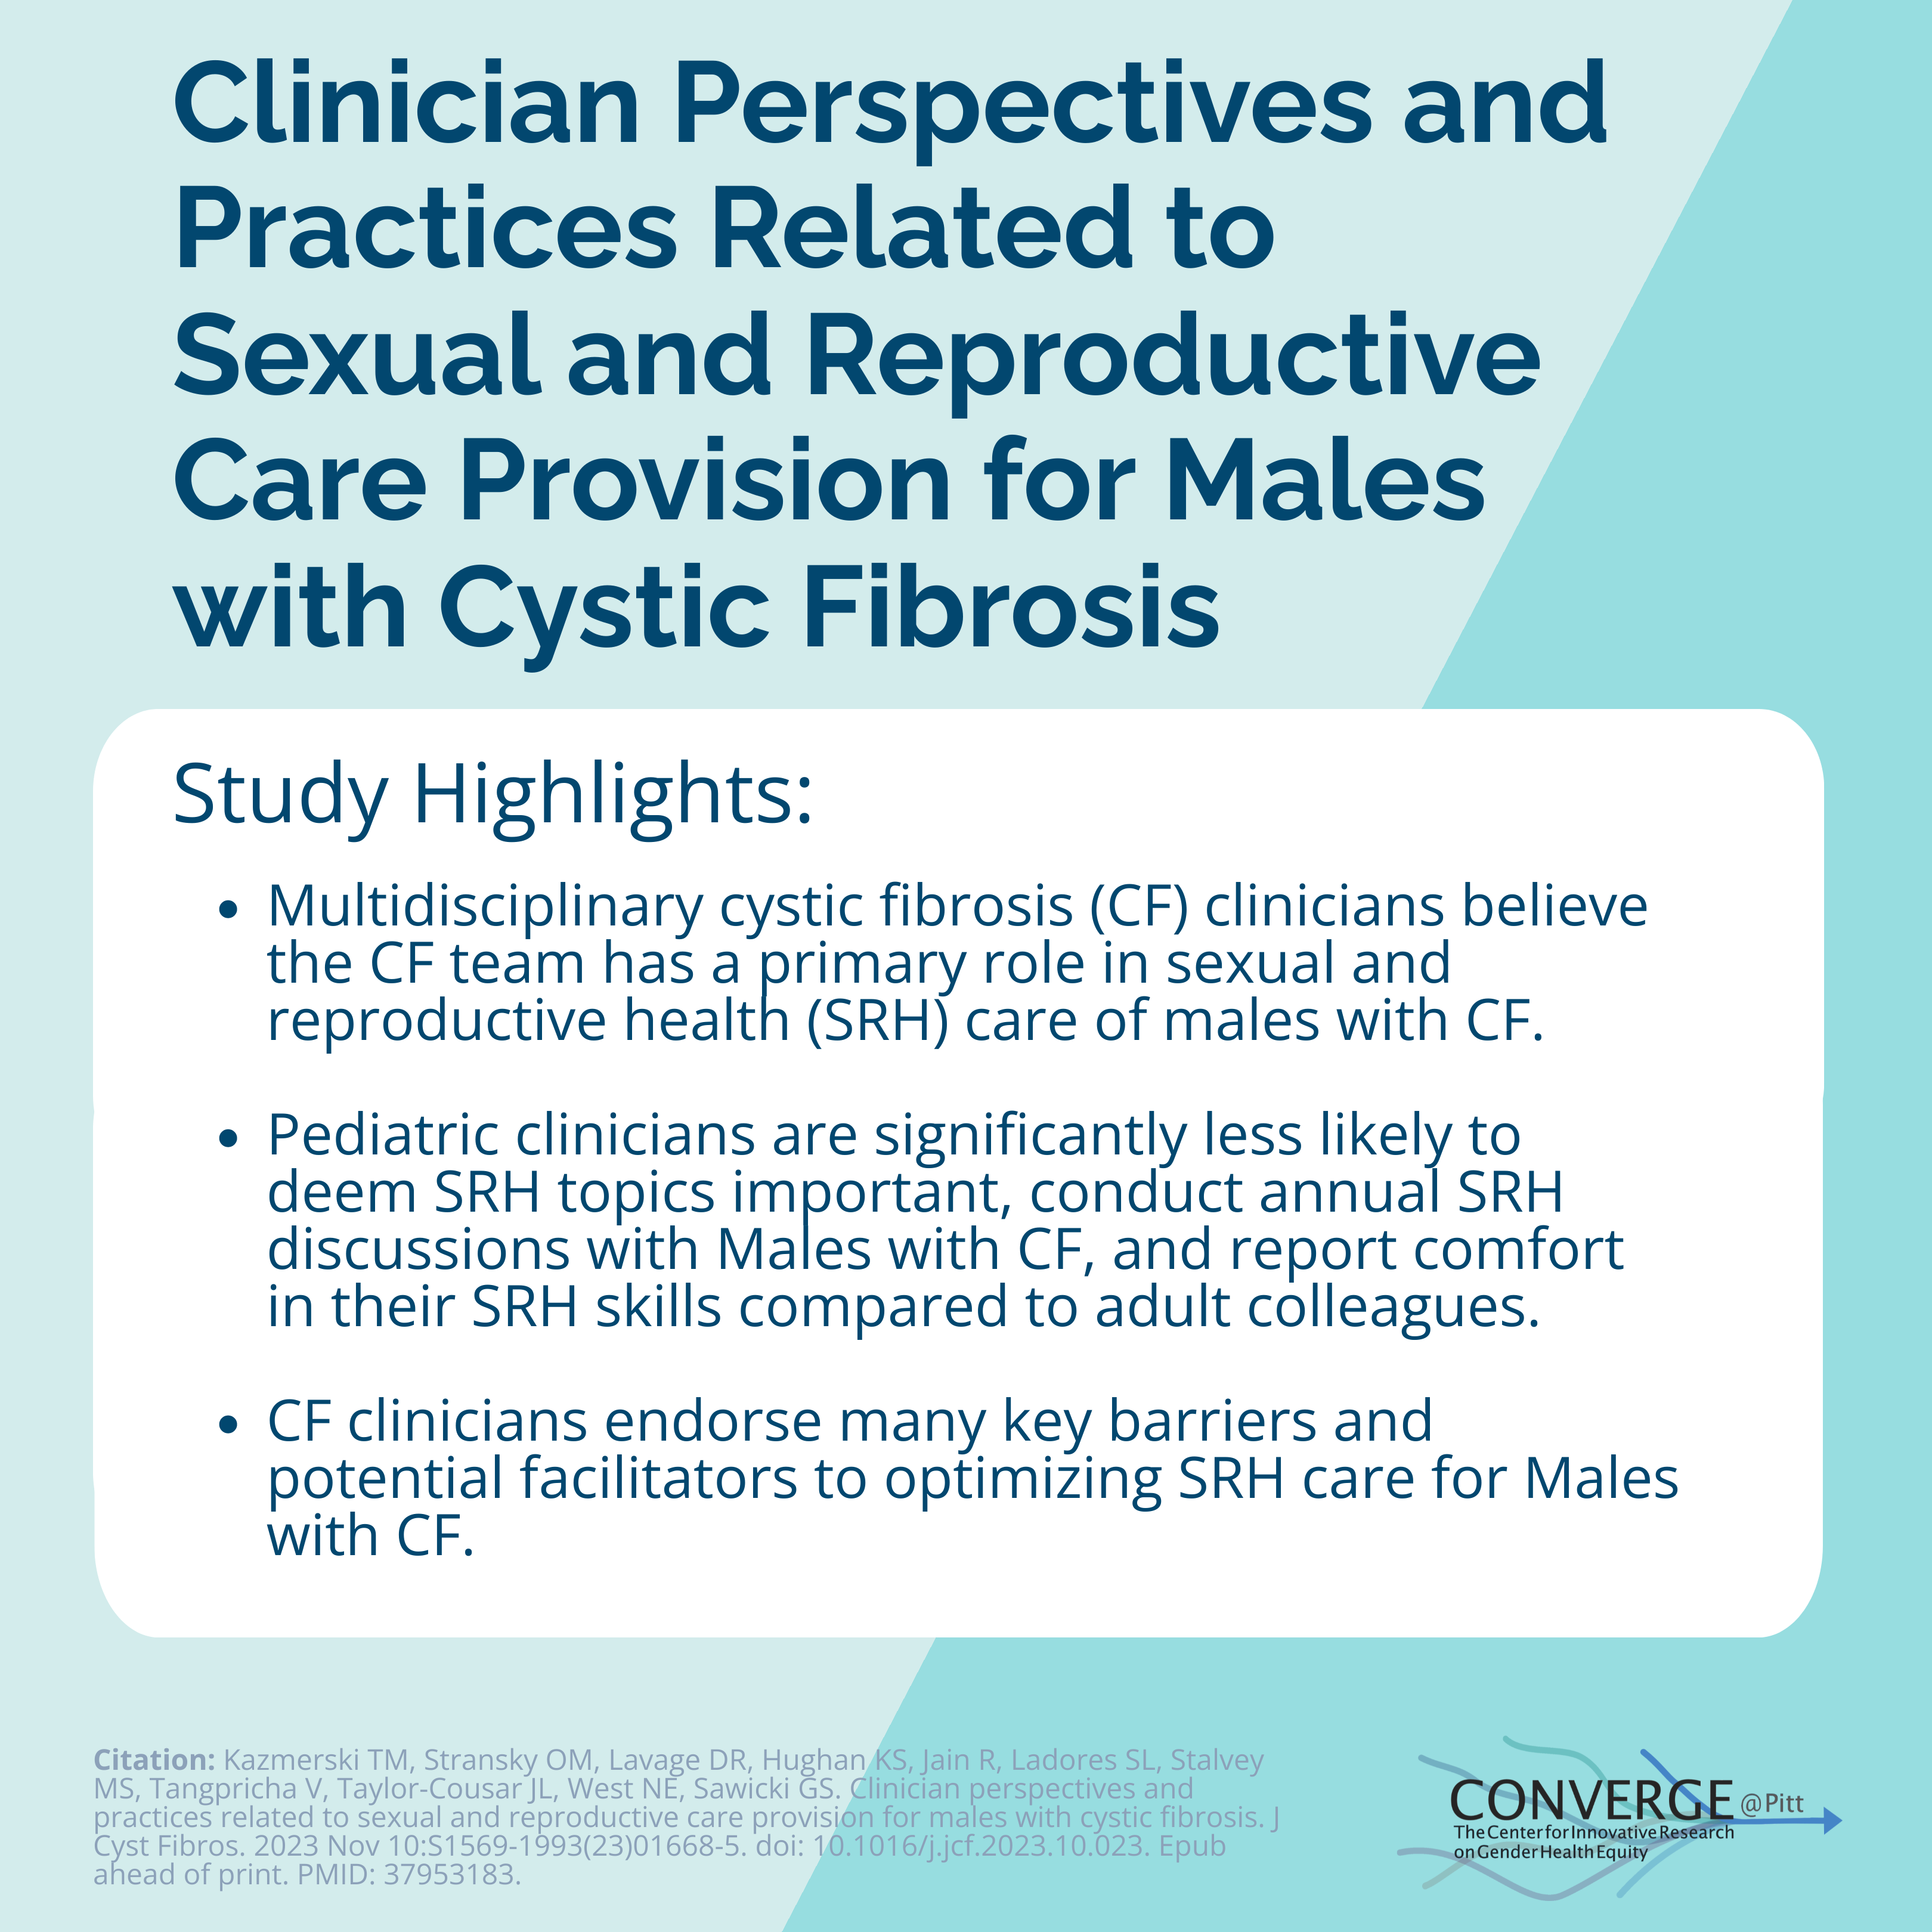 Clinician perspectives and practices related to sexual and reproductive care provision for males with cystic fibrosis